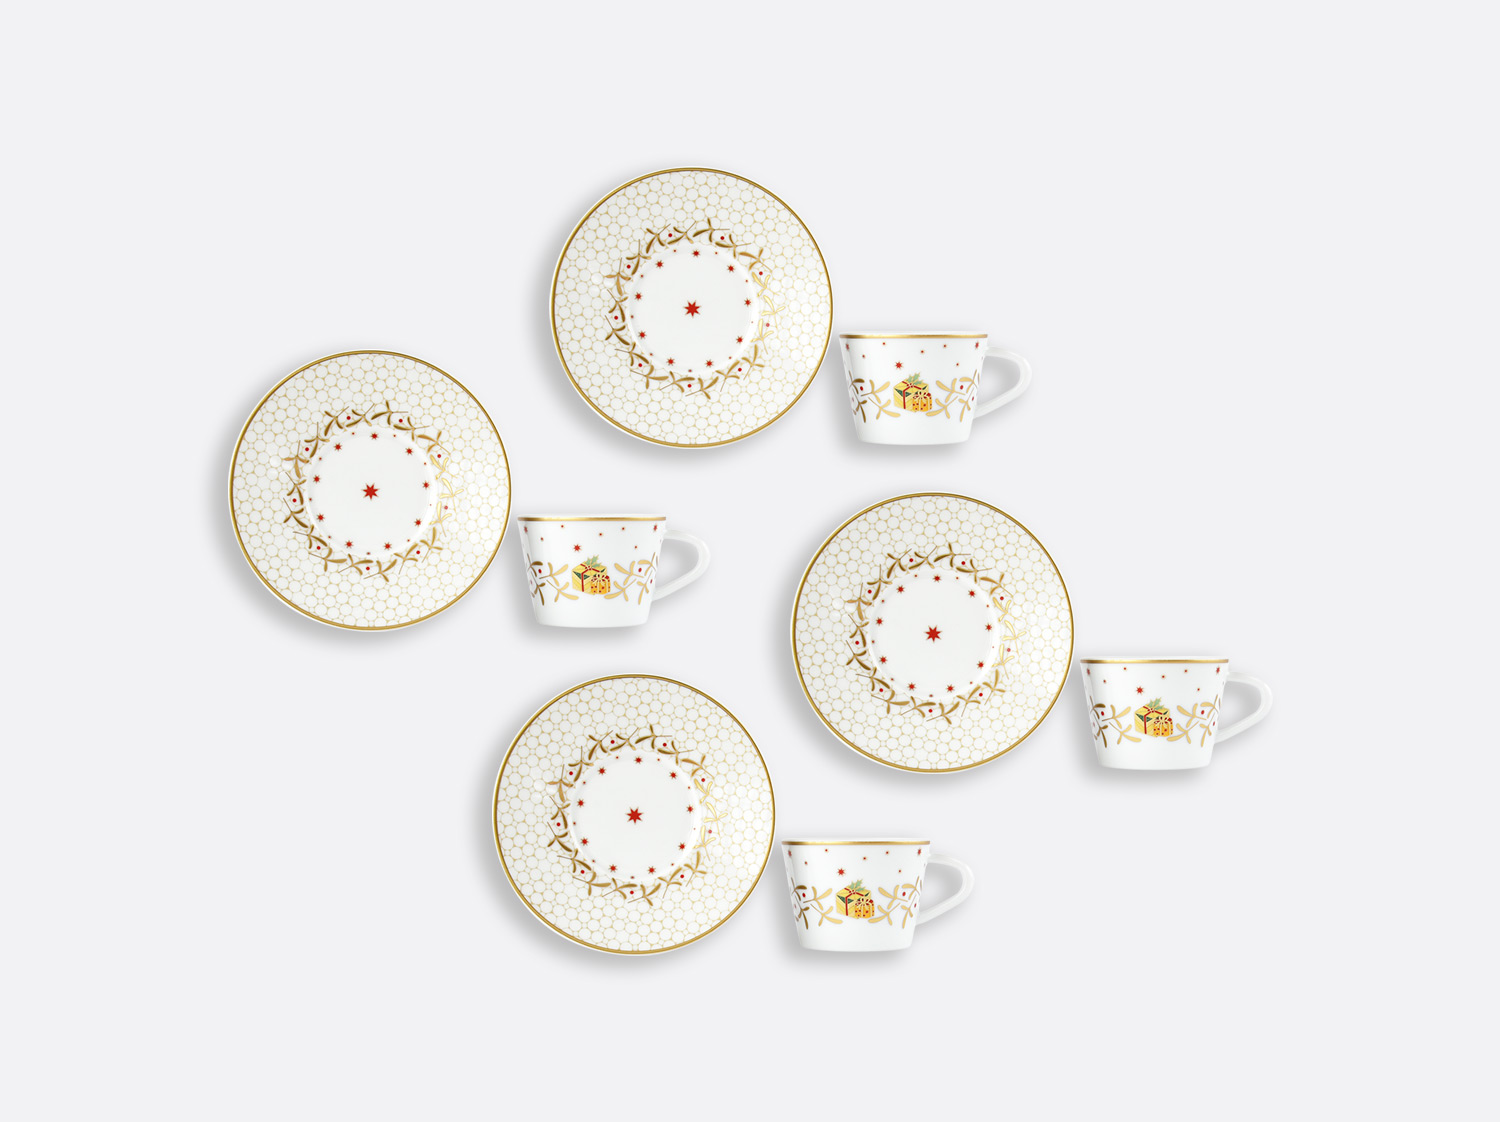 China Espresso cup and saucer gift box - 2.8 Oz - Set of 4 of the collection Noël | Bernardaud